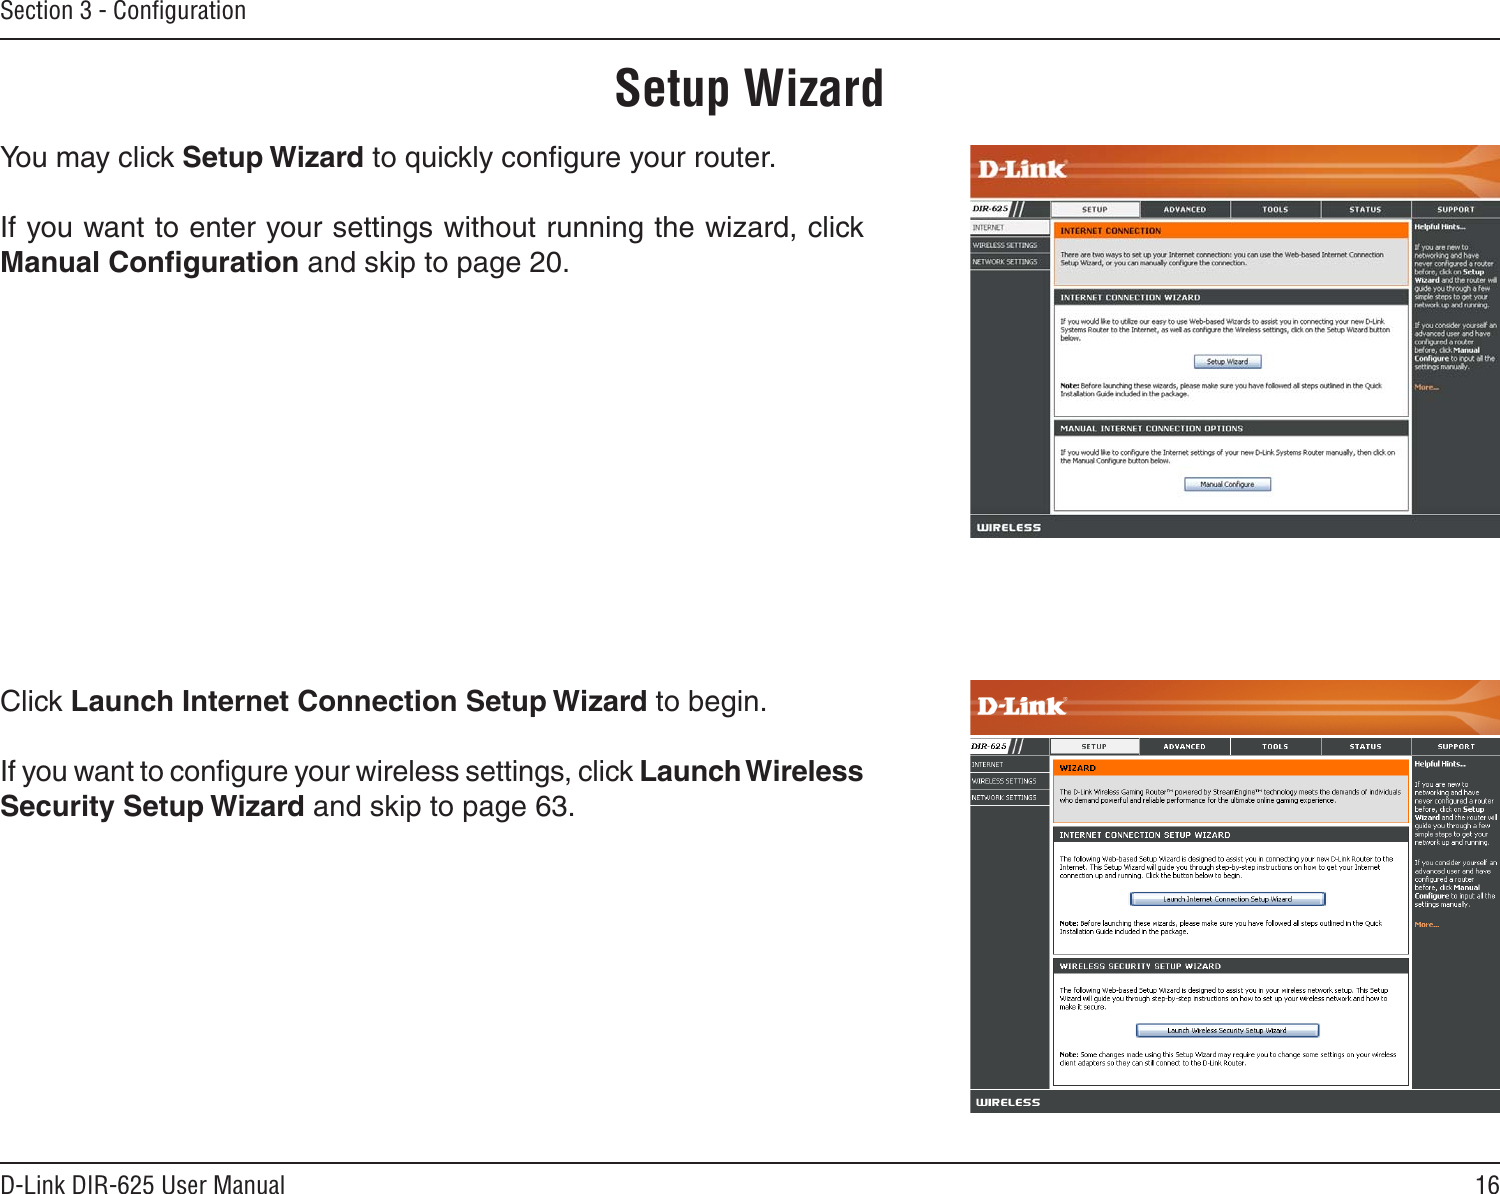 16D-Link DIR-625 User ManualSection 3 - ConﬁgurationSetup WizardYou may click Setup Wizard to quickly conﬁgure your router.If you want to enter your settings without running the wizard, click Manual Conﬁguration and skip to page 20.Click Launch Internet Connection Setup Wizard to begin.If you want to conﬁgure your wireless settings, click Launch Wireless Security Setup Wizard and skip to page 63.